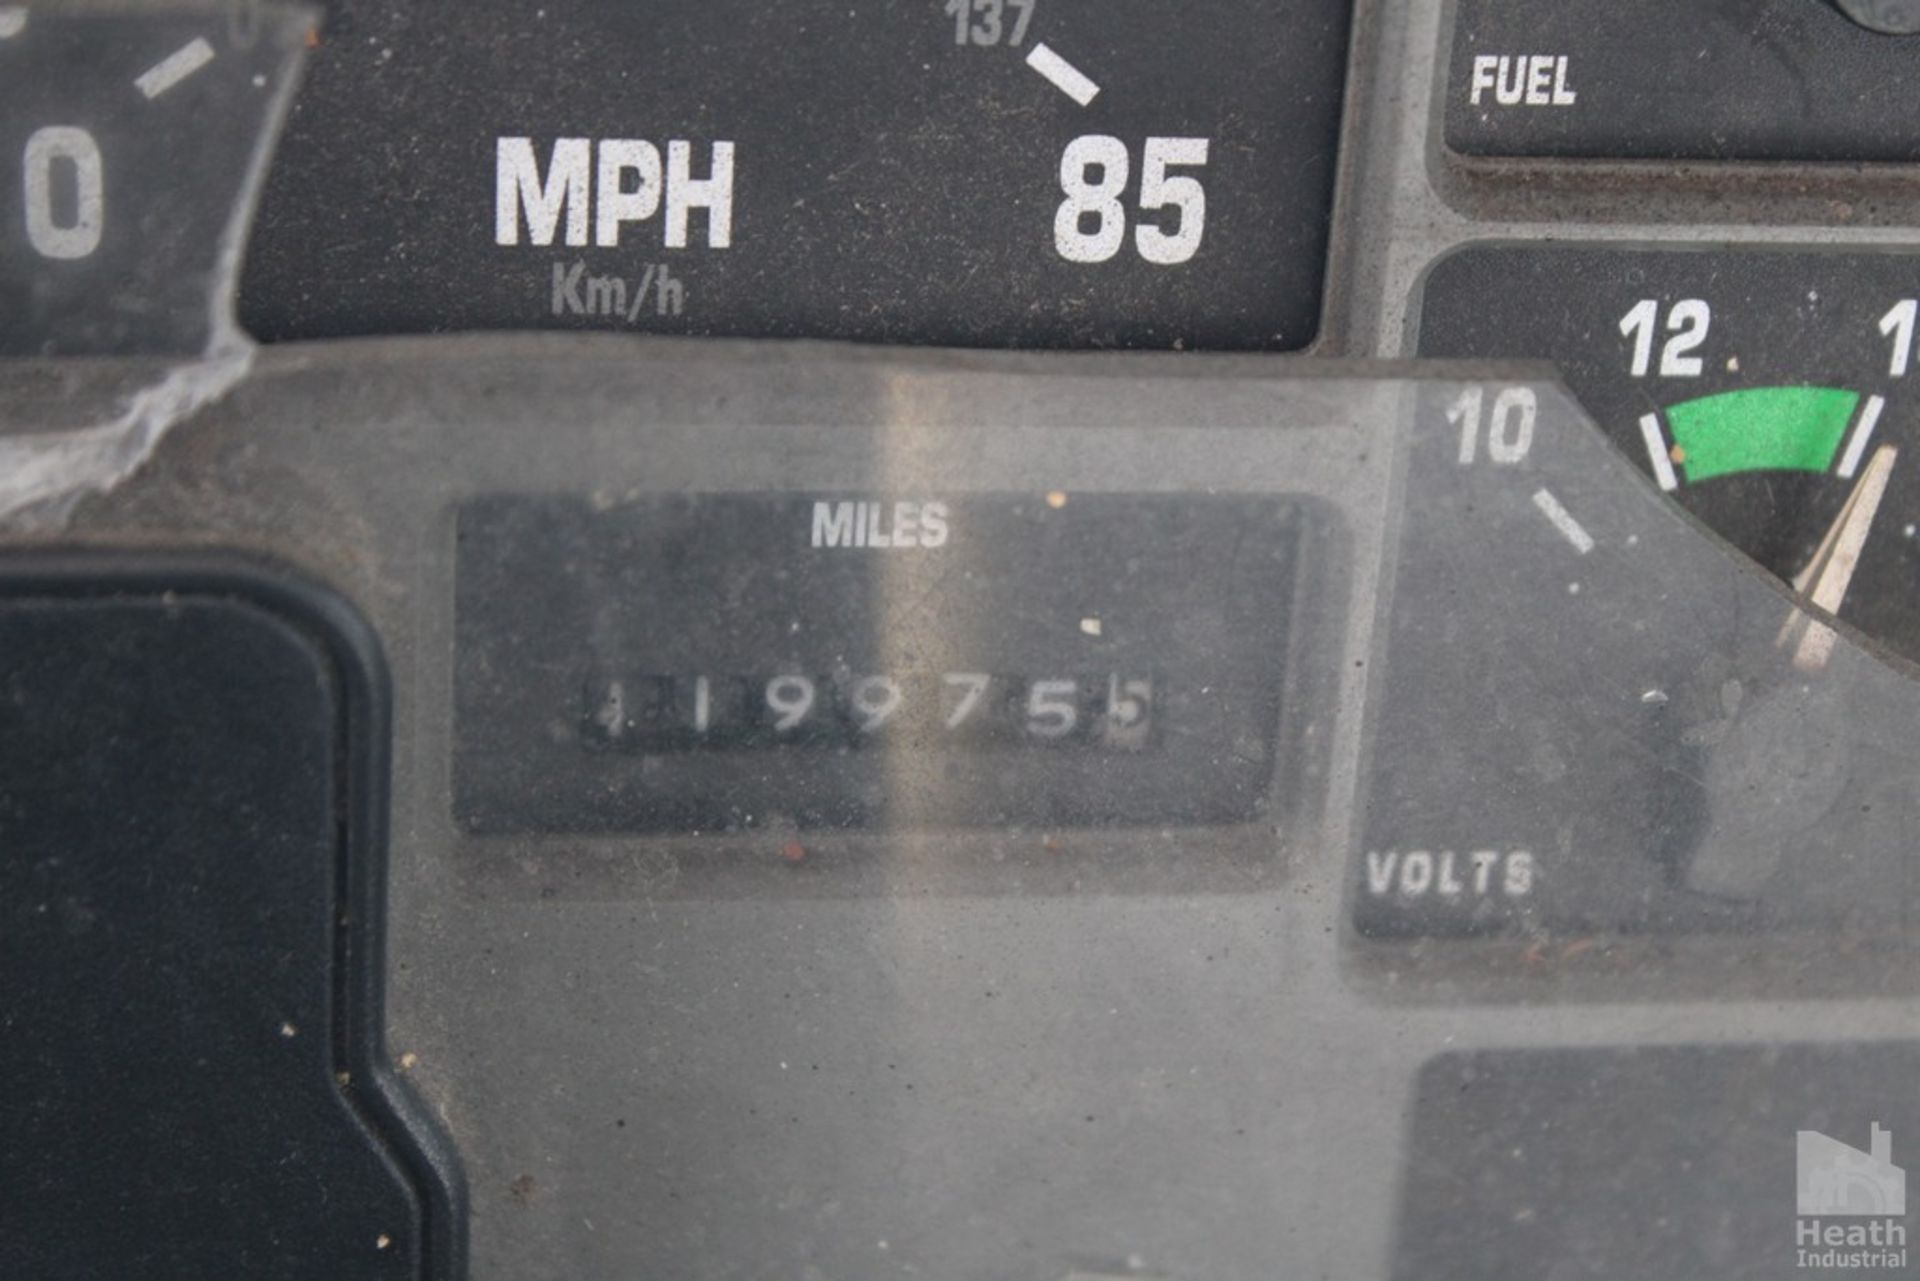 2000 INTERNATIONAL 4700 26FT MOVERS TRUCK, 7.6L L6 DIESEL ENGINE, 119,975 MILES SHOWN ON ODOMETER, - Image 12 of 14